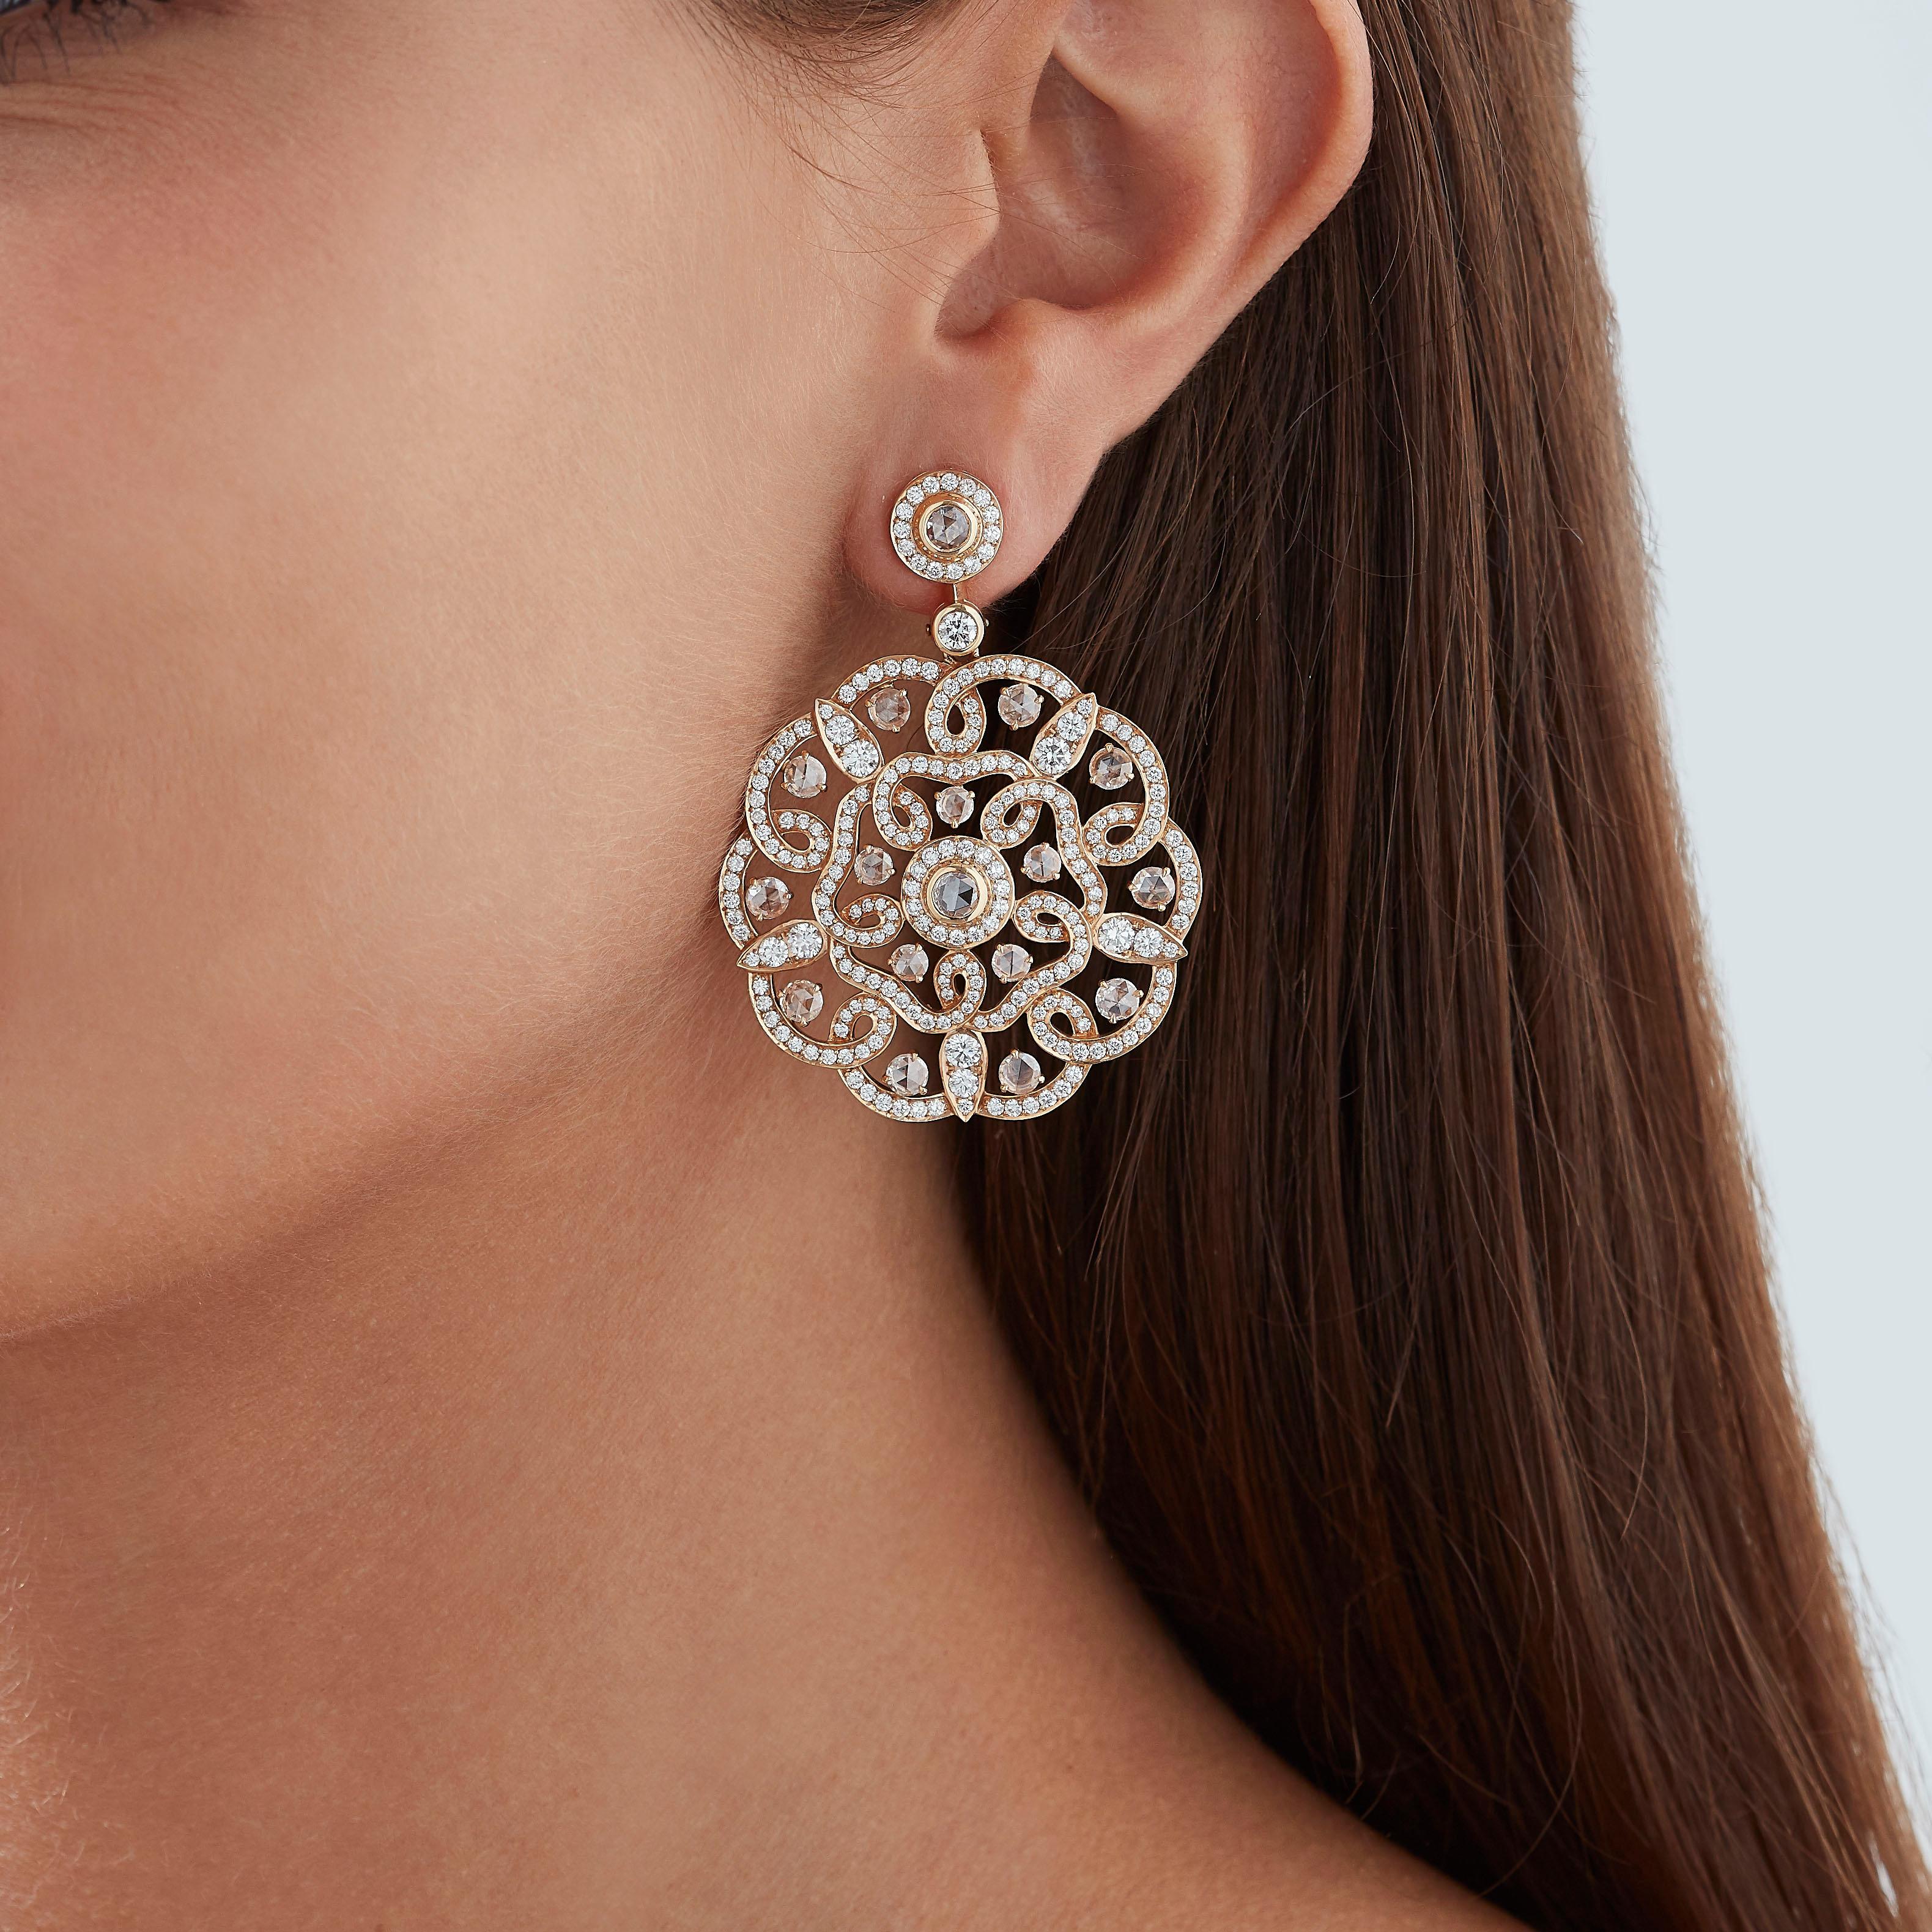 A House of Garrard pair of 18 karat rose gold earrings from the Tudor Rose collection set with rose cut and round white diamonds.                                                      
34 rose cut white diamonds weighing 1.26cts                      